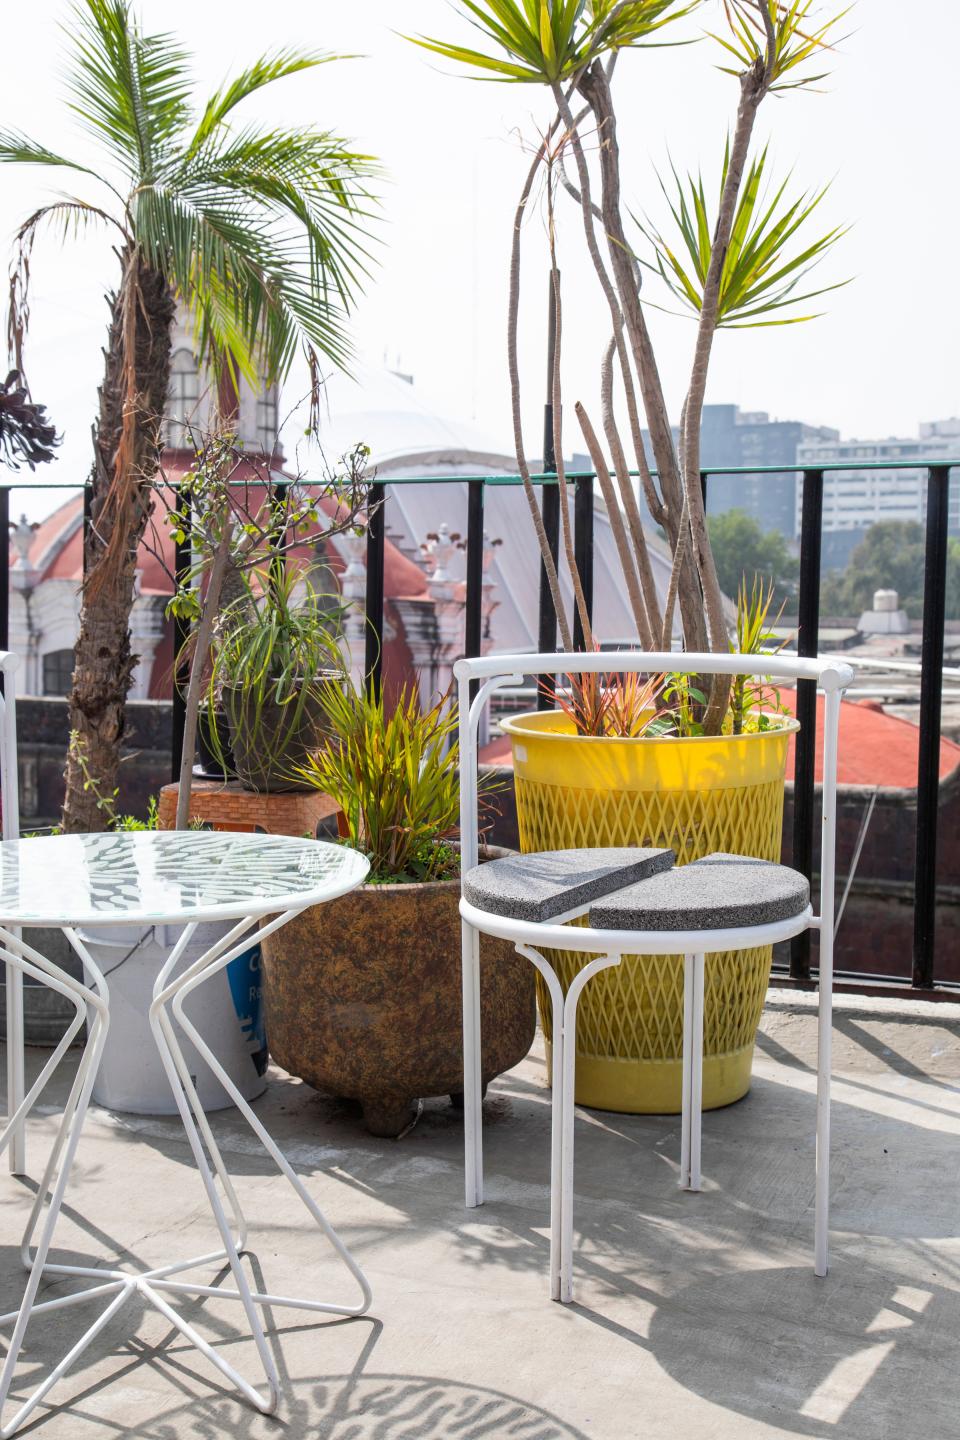 The designer’s sunny rooftop terrace is home to a Stromboli Associates painted-glass table and volcanic stone chair.